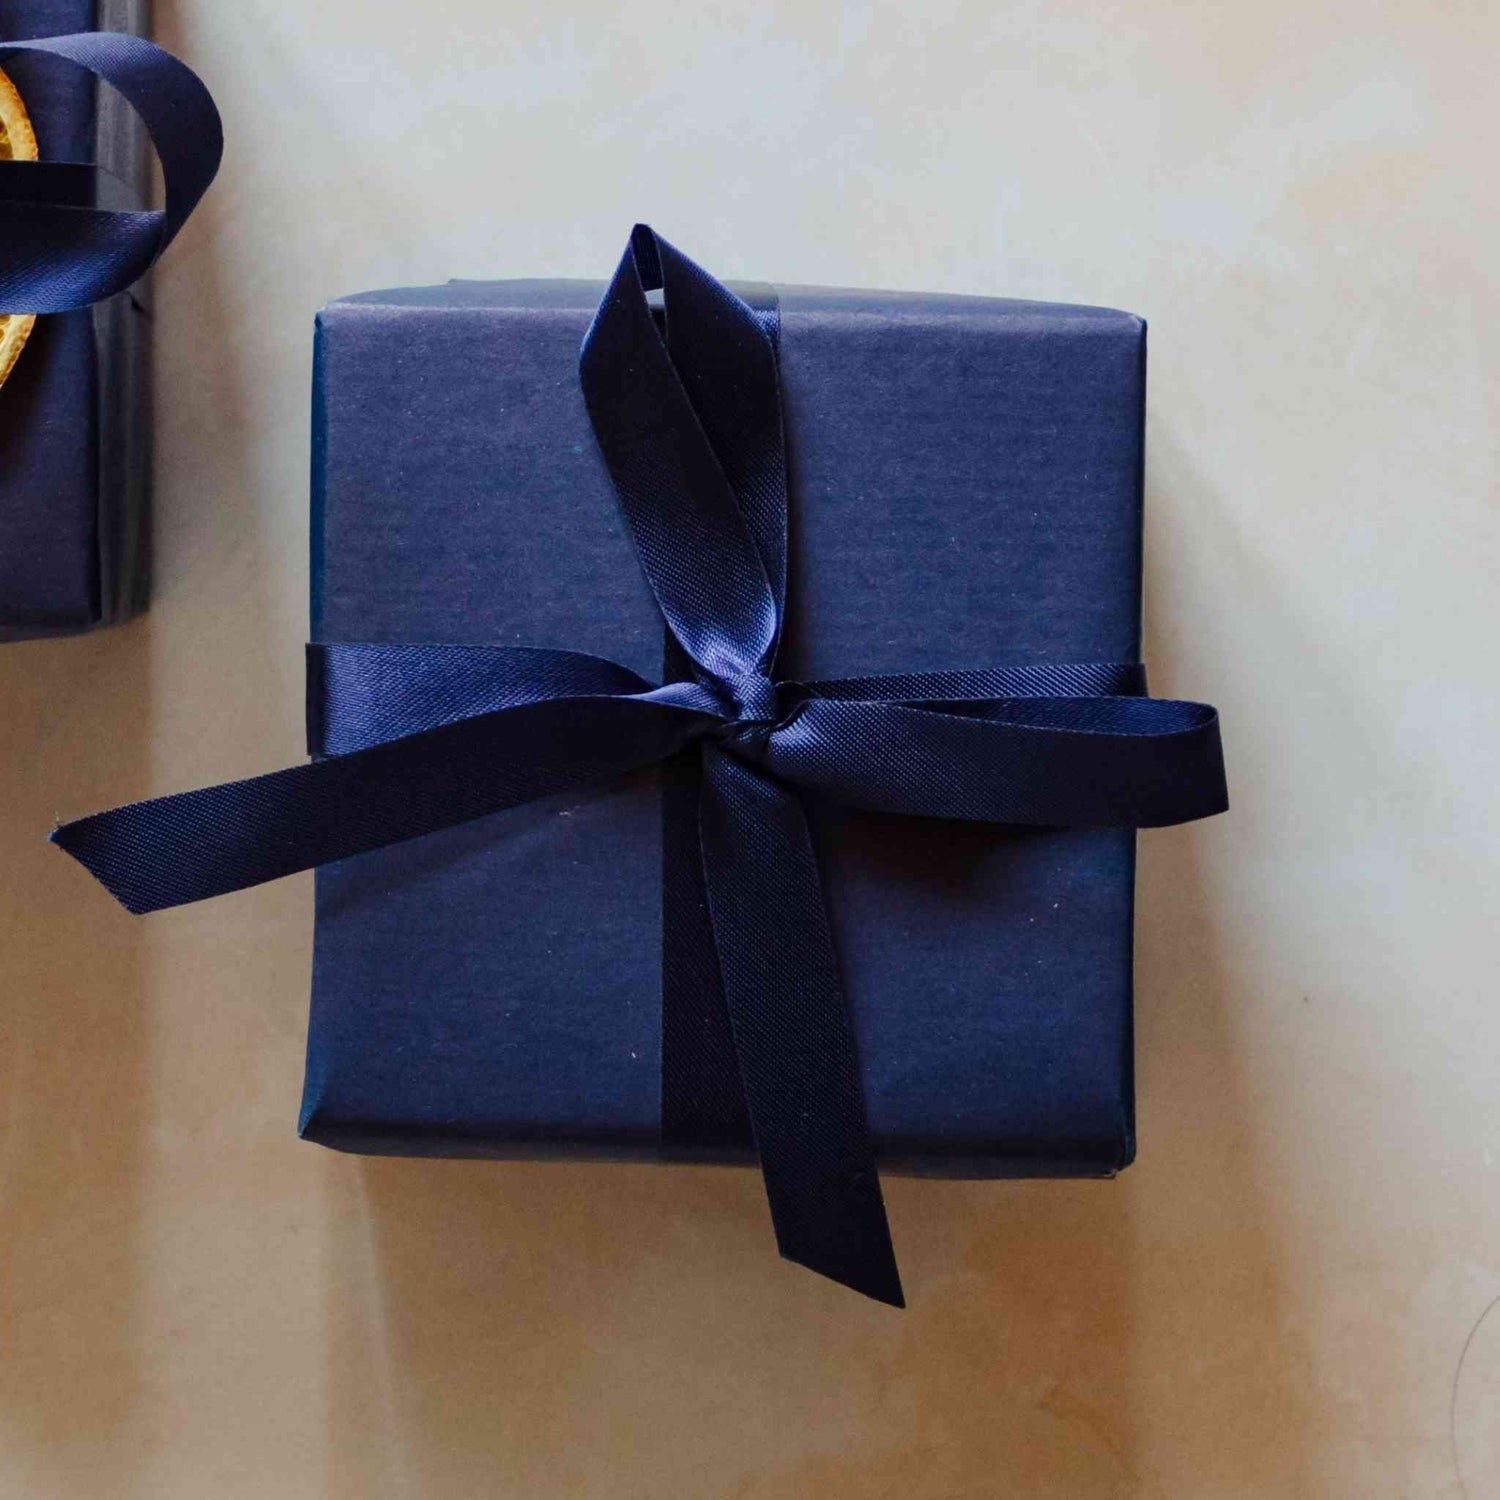 A 200g soy candle from the Home County Co. is shown with luxury Gift Wrap. The candle is wrapped in luxury navy wrapping paper secured with navy ribbon.